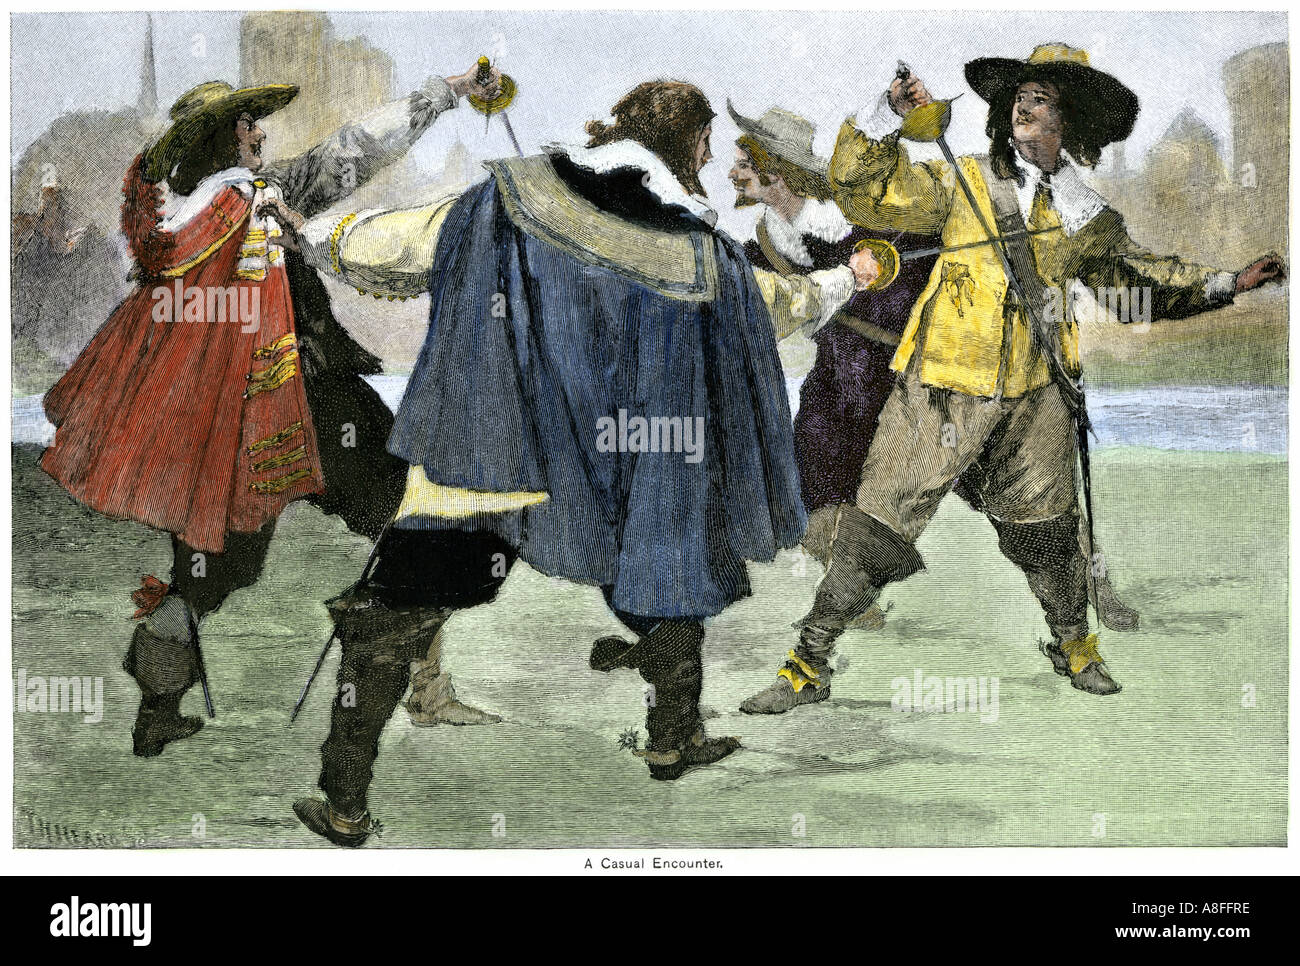 Three Musketeers in a sword fight with an opponent in the Alexandre Dumas novel. Hand-colored woodcut Stock Photo